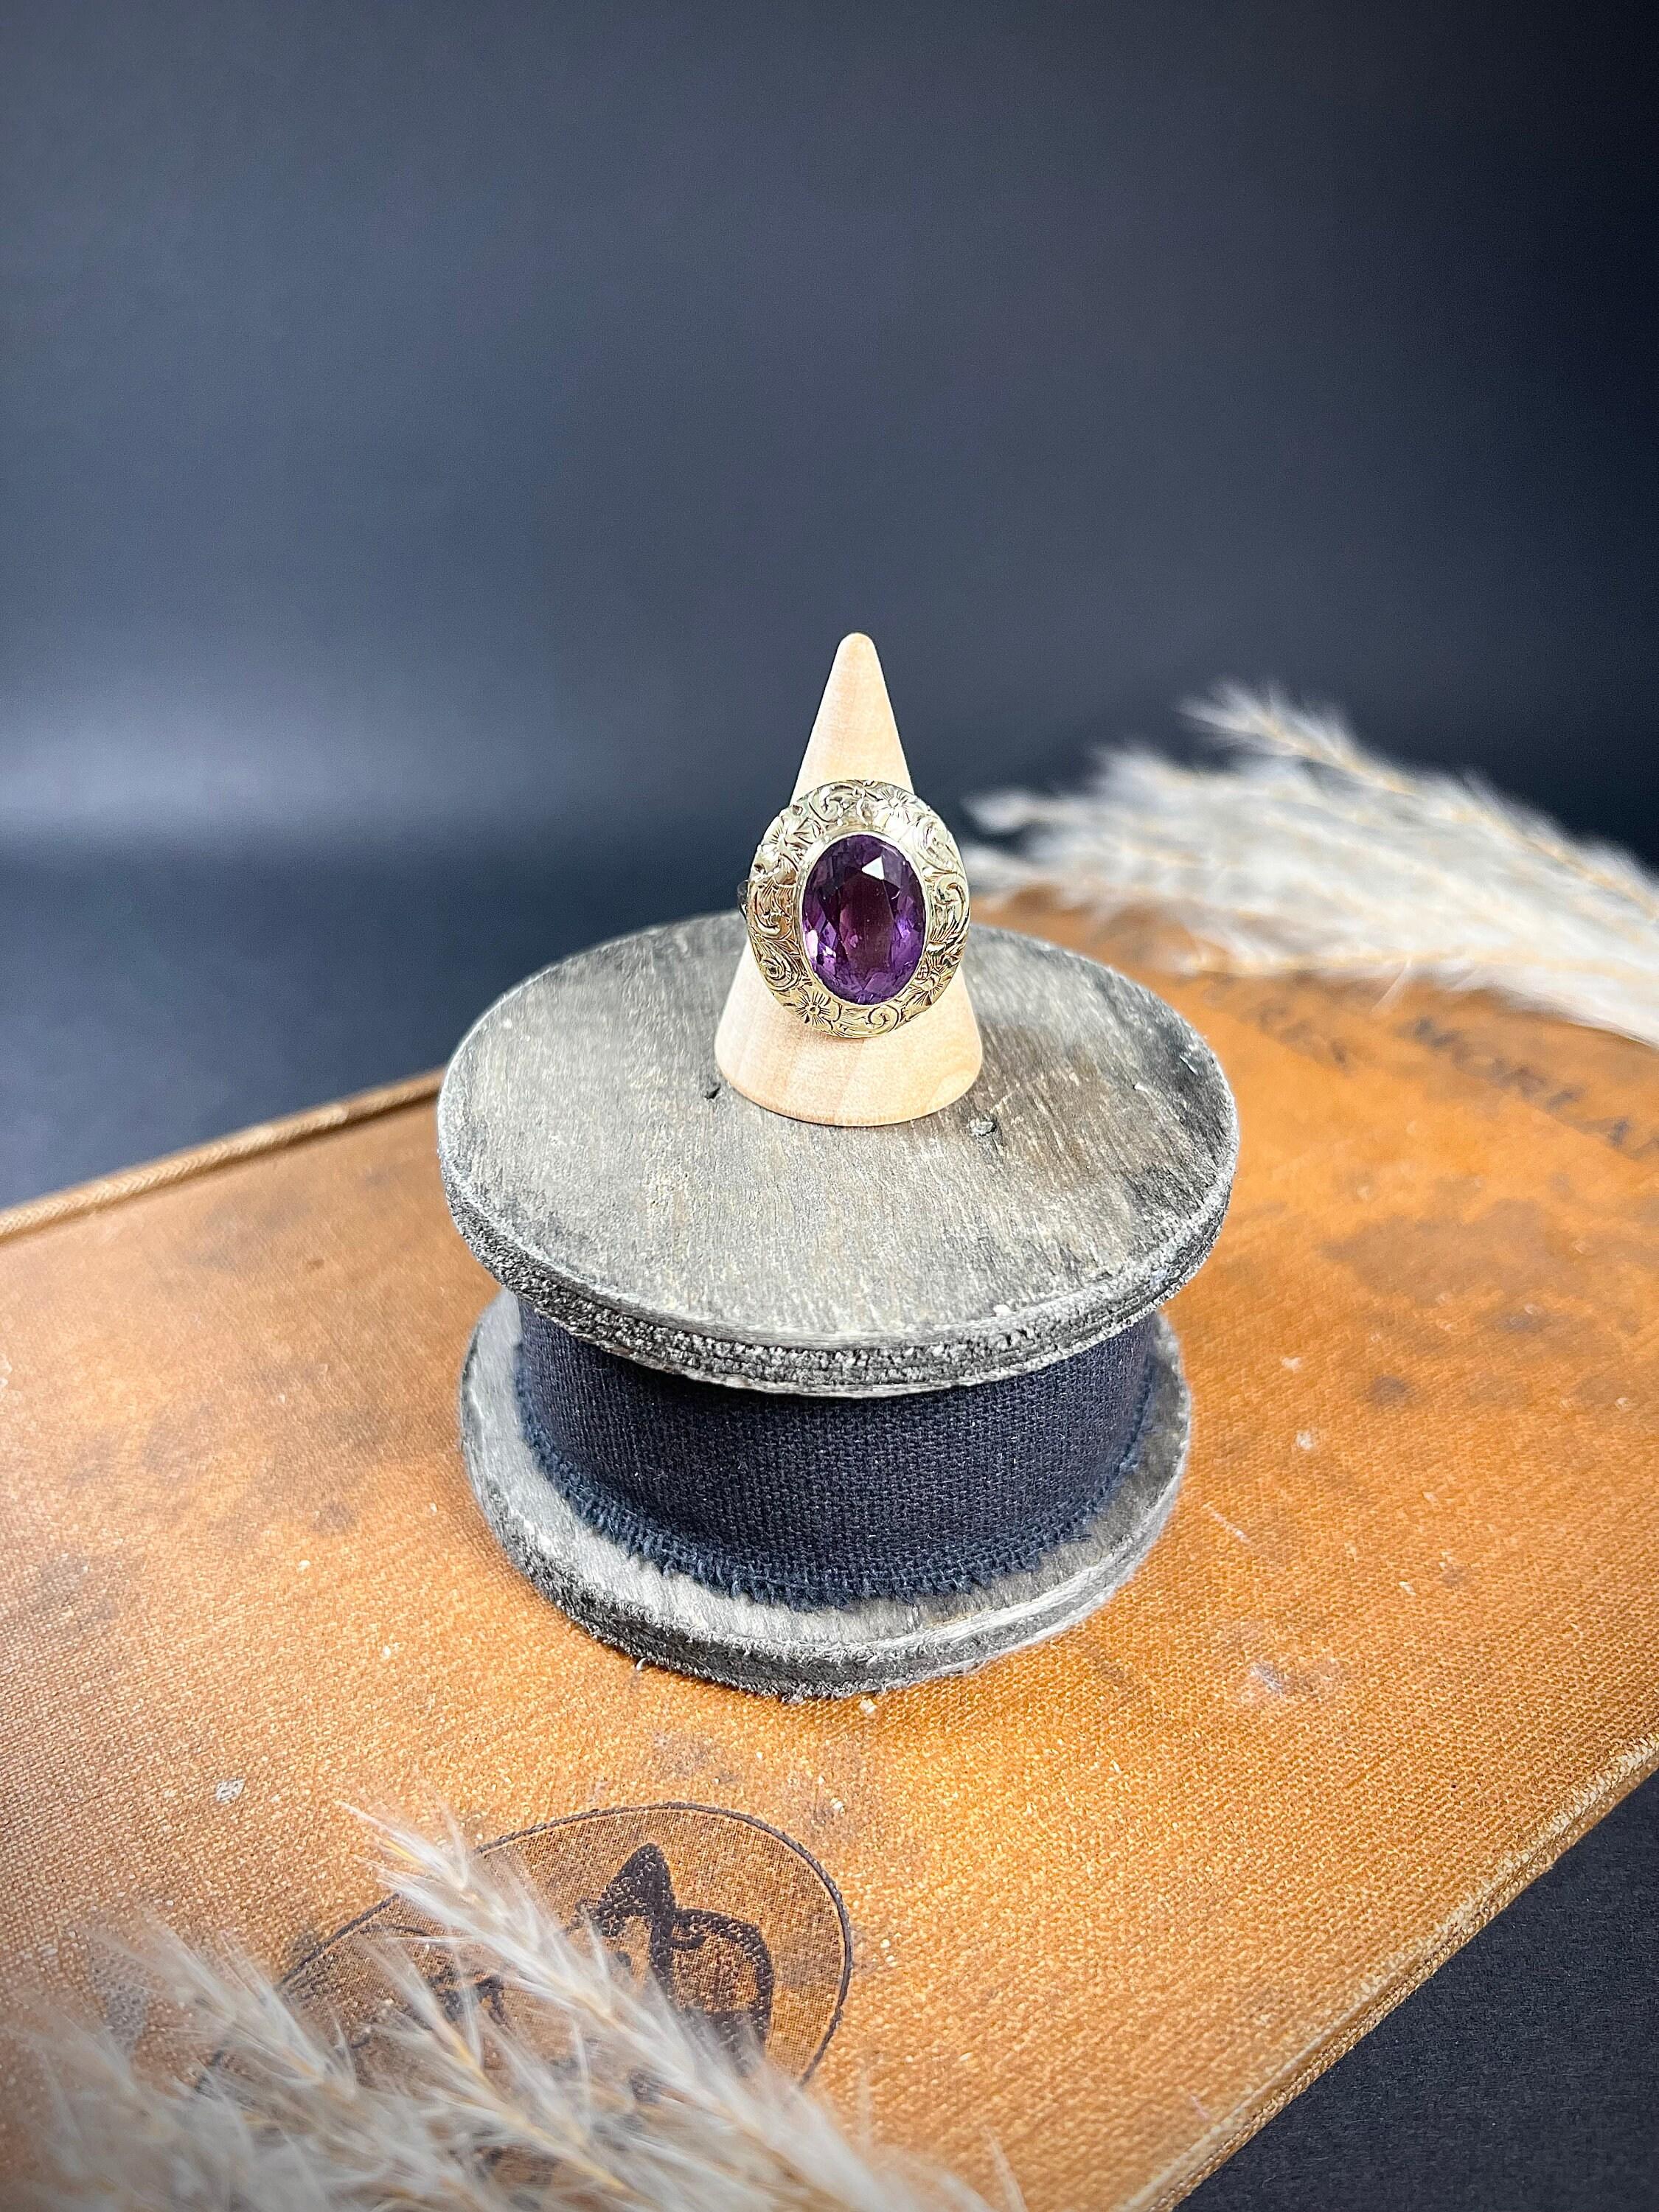 Antique 14ct Gold Victorian Oval Faceted Amethyst Ring For Sale 5